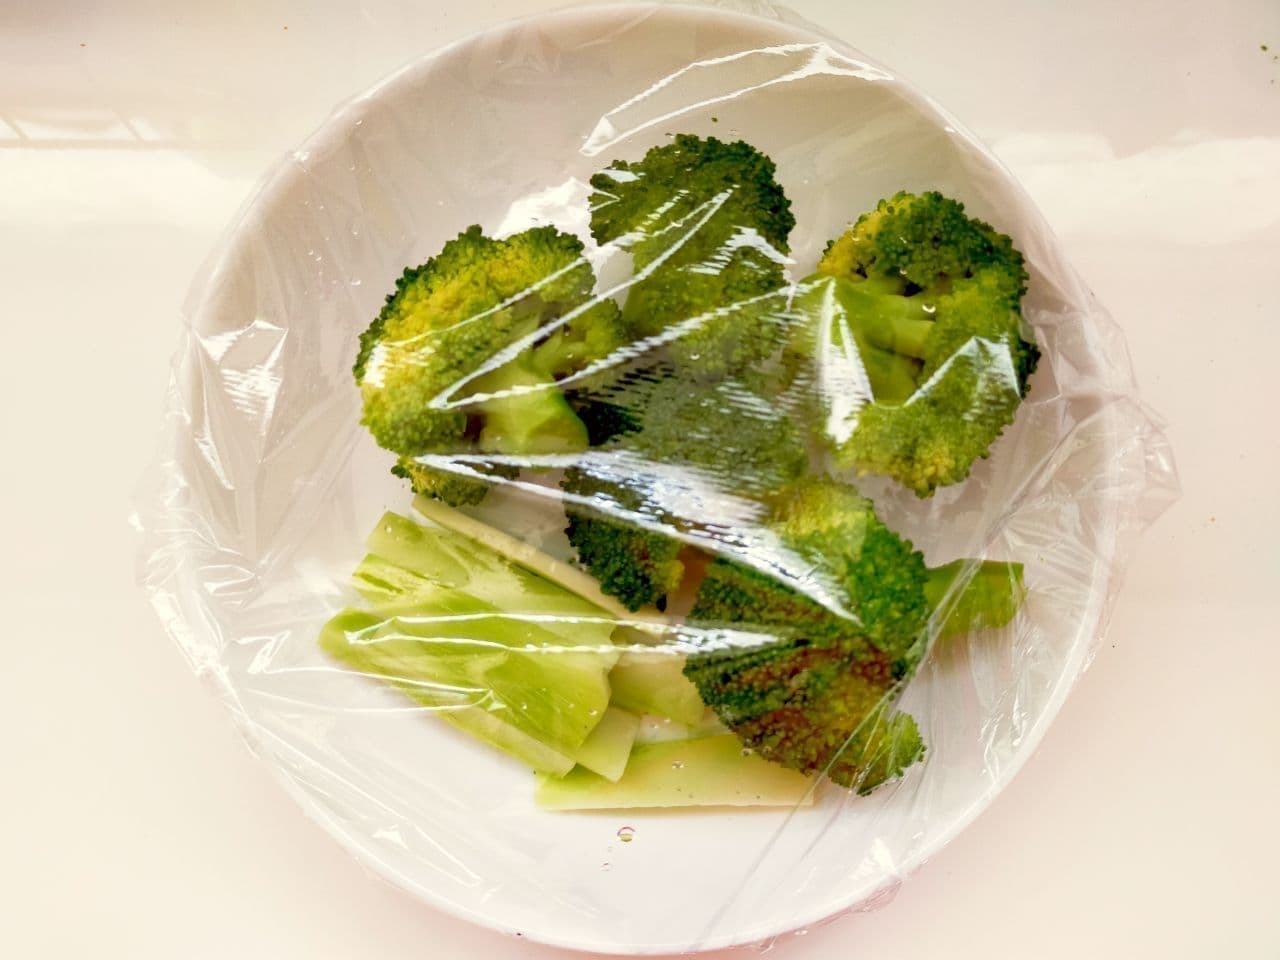 Step 2 How to steam broccoli in the microwave